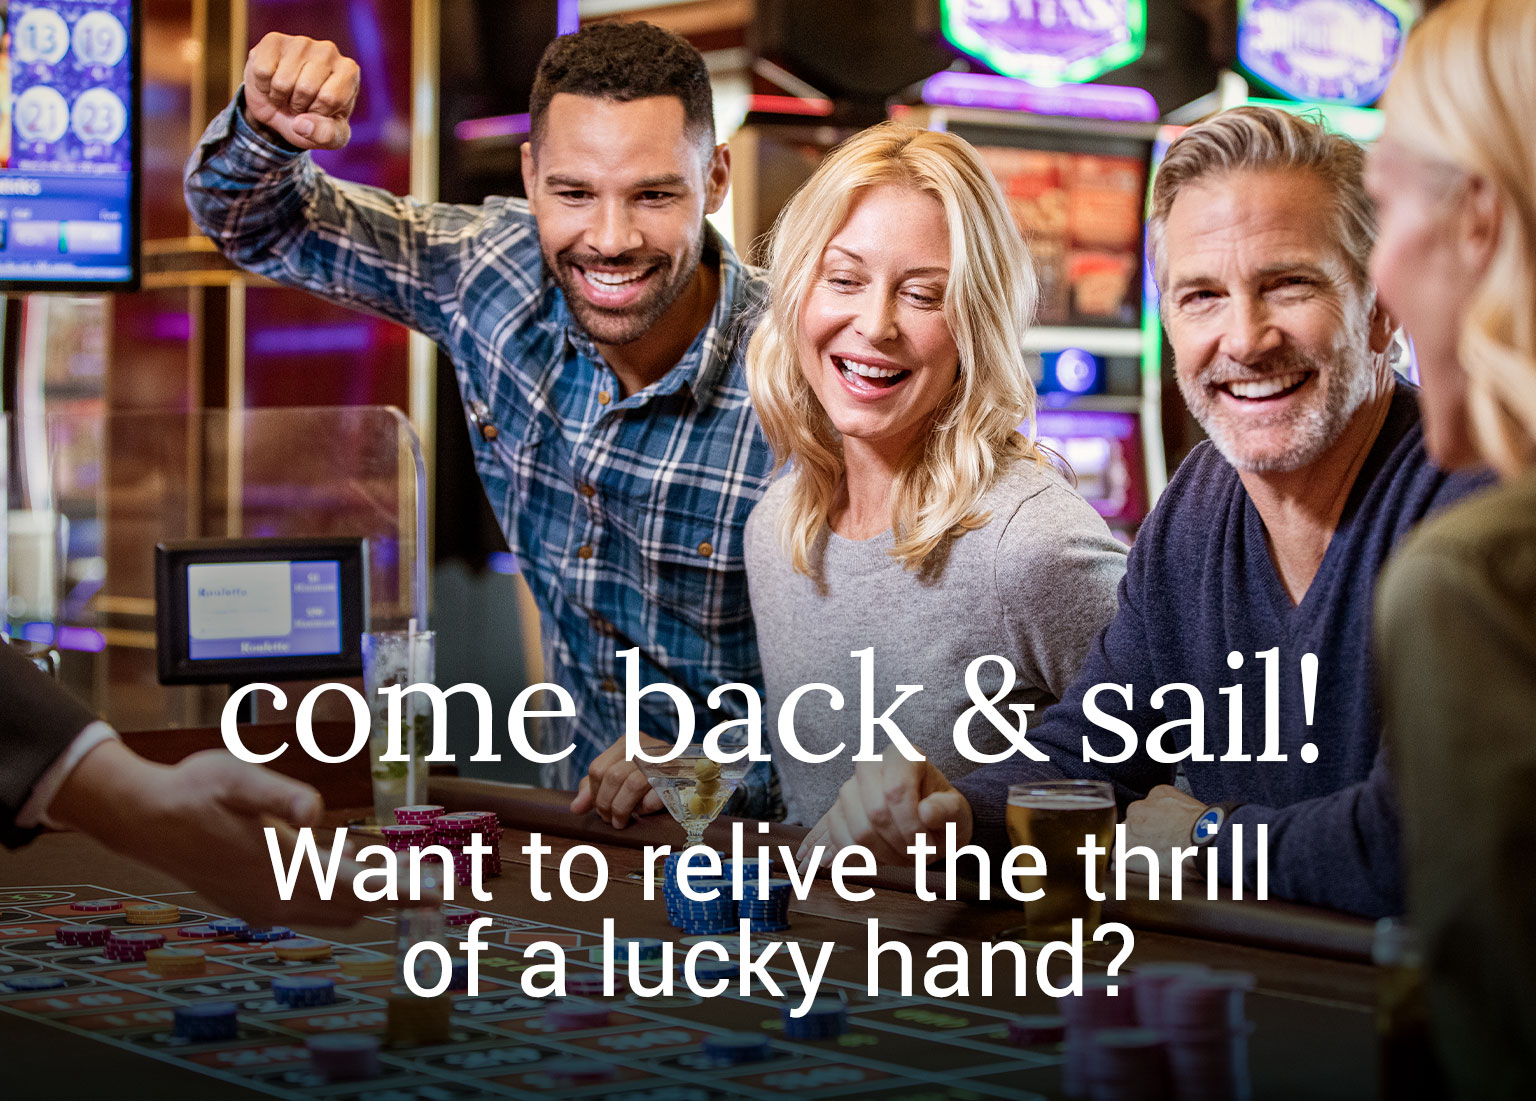 Come Back & Play! Want to relive the thrill of a lucky hand? - Friends cheer while playing roulette